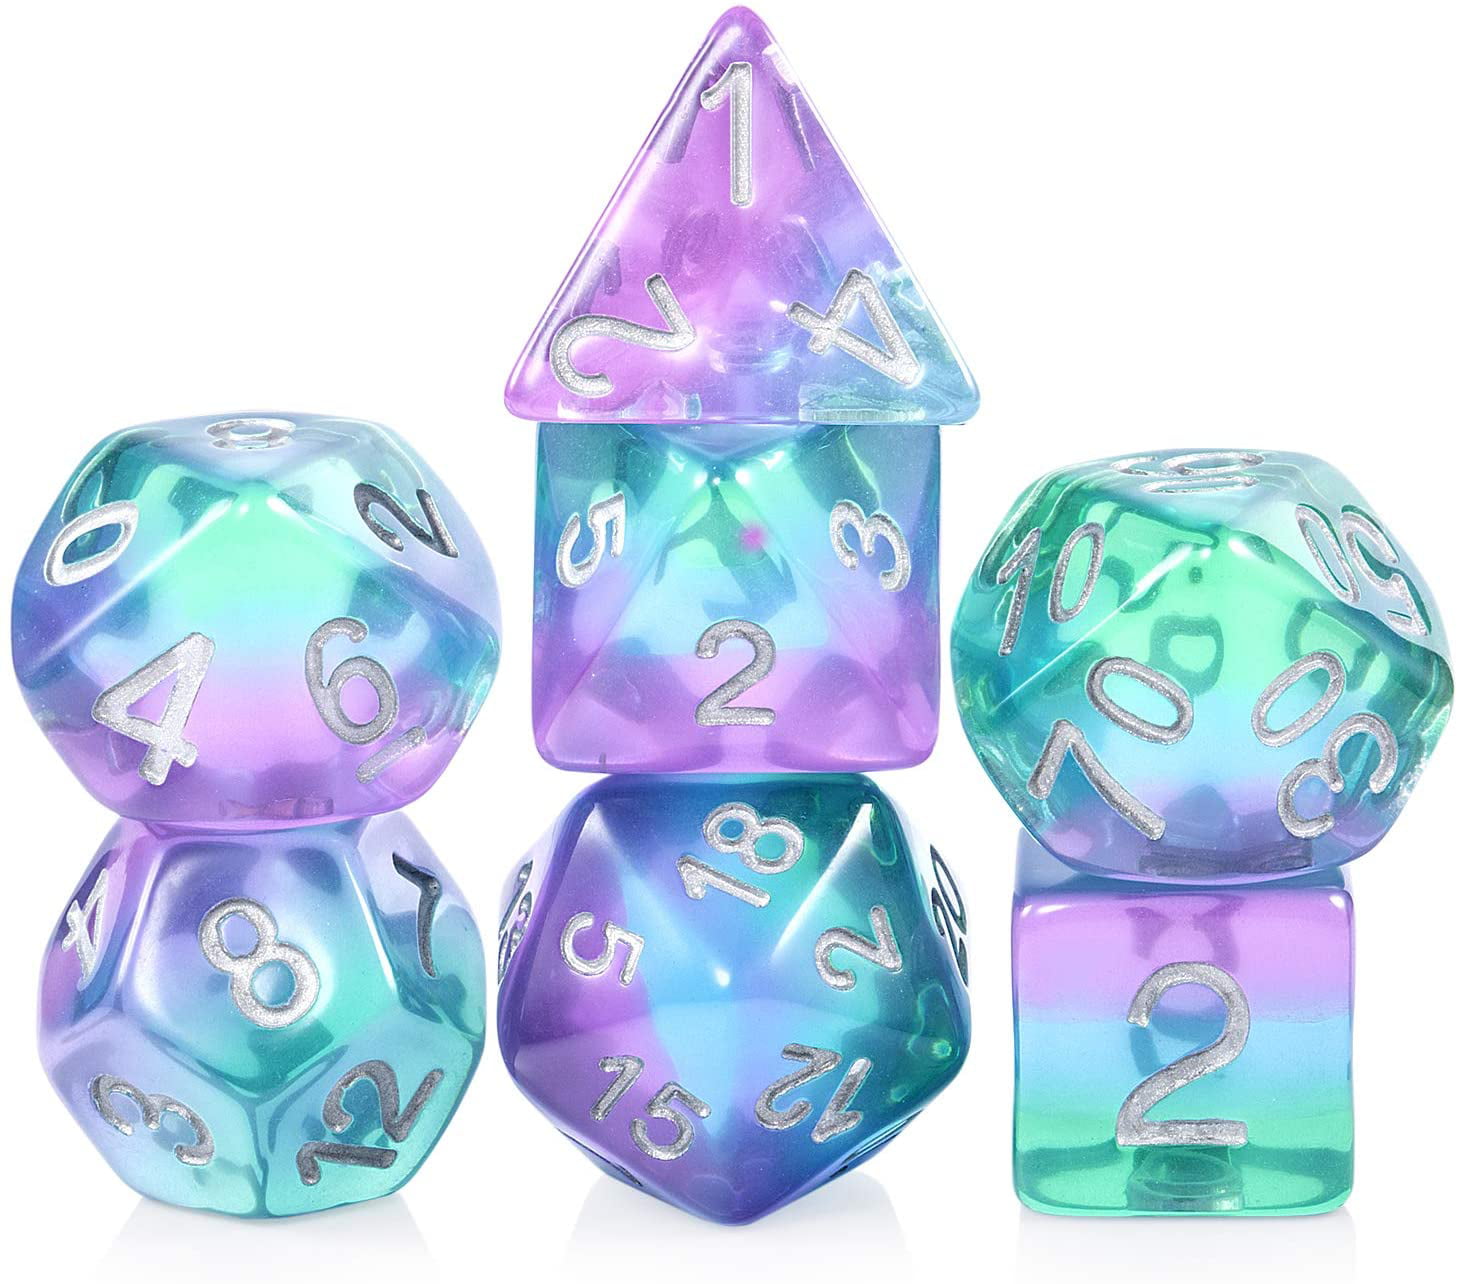 Details about   DUNGEONS & DRAGONS D&D 7 Pc Dice Set Purple White Roleplaying Game Dice 